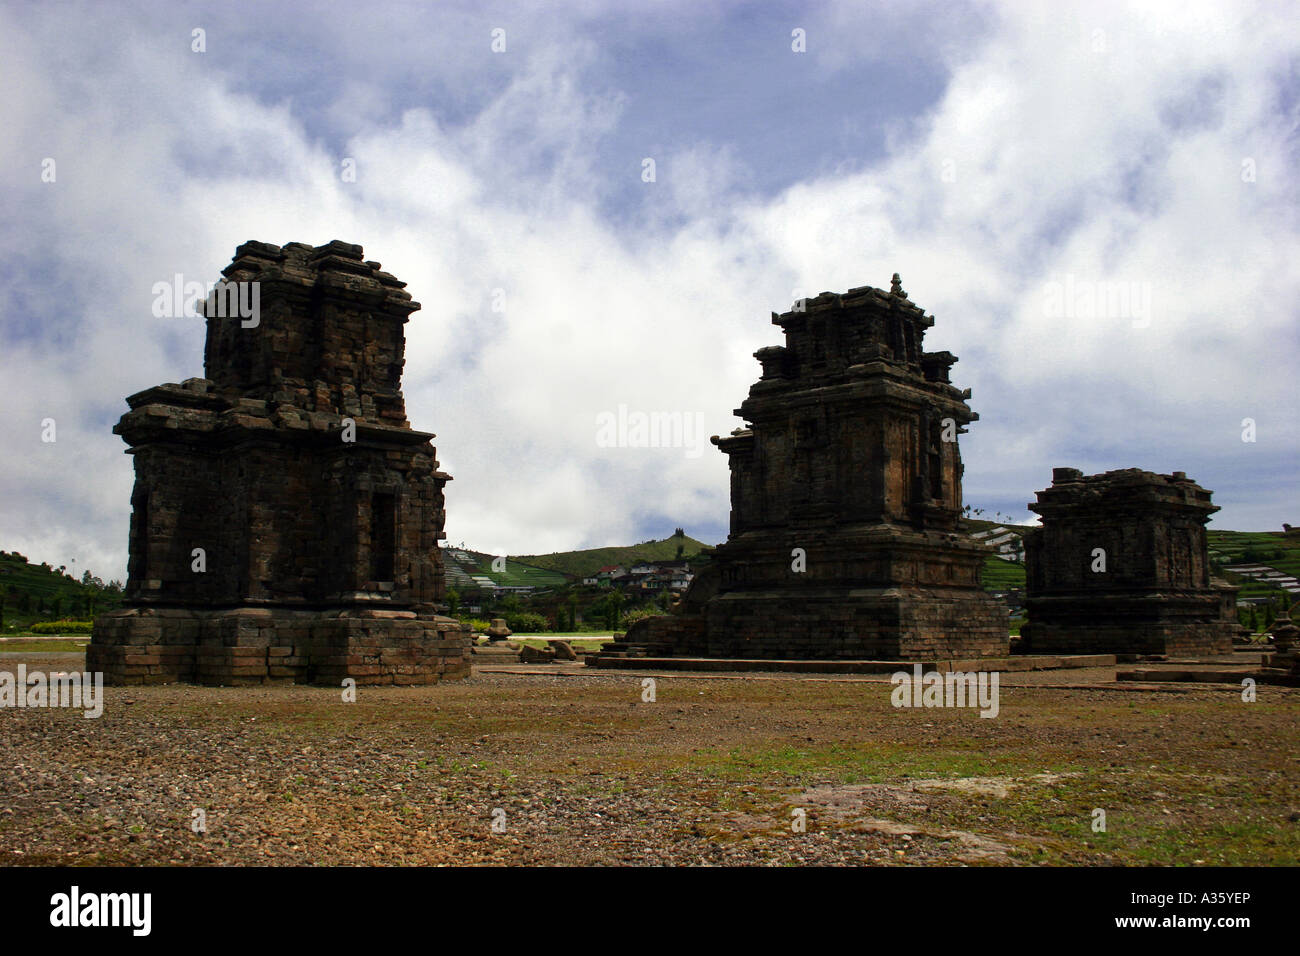 Candi Arjuna complex at Dieng Plateau in Central Java Indonesia Stock Photo